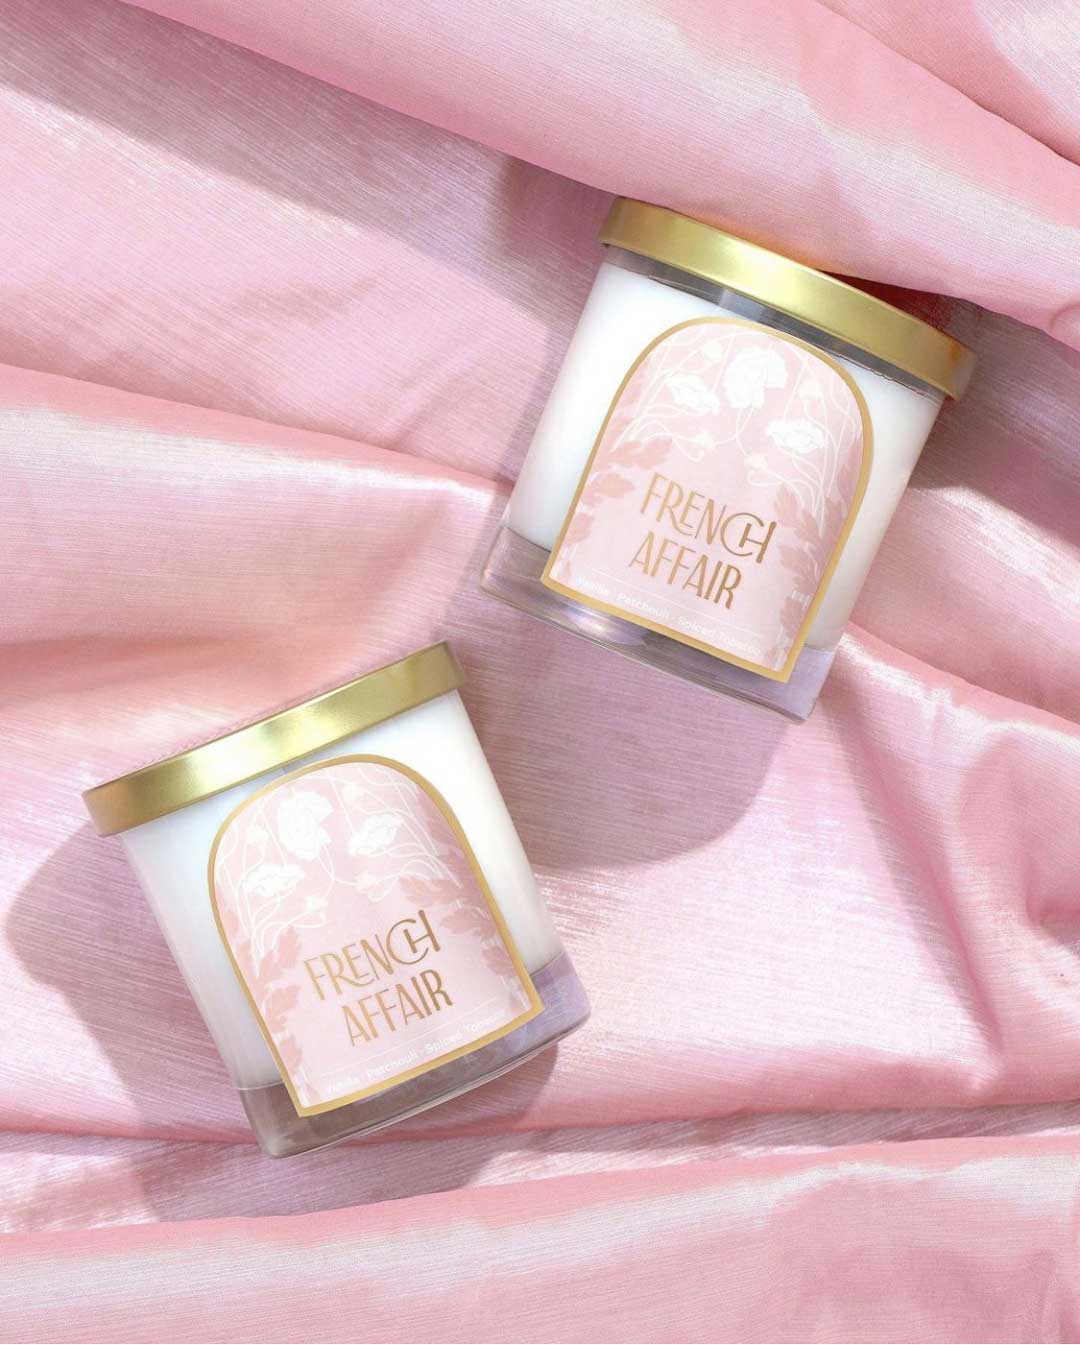 Fancy Face French Affair Candle